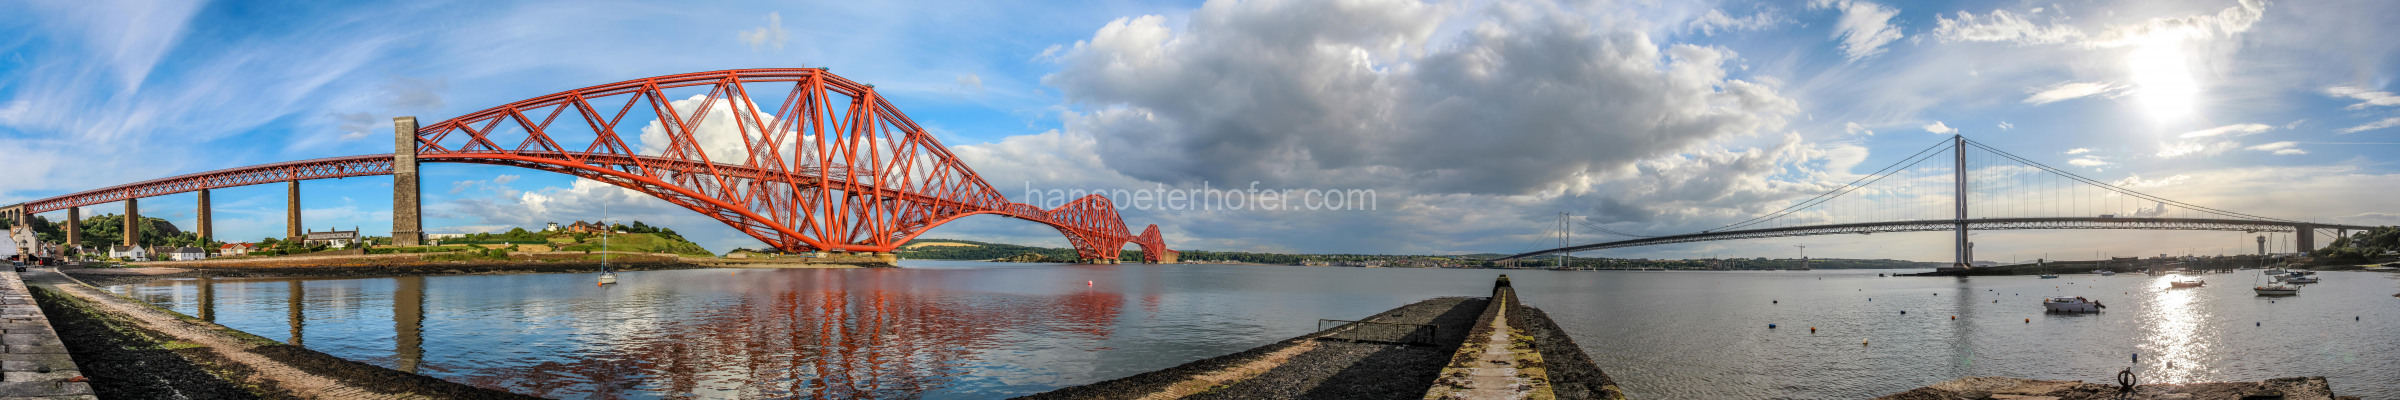 Pano_Firth-of-Forth-